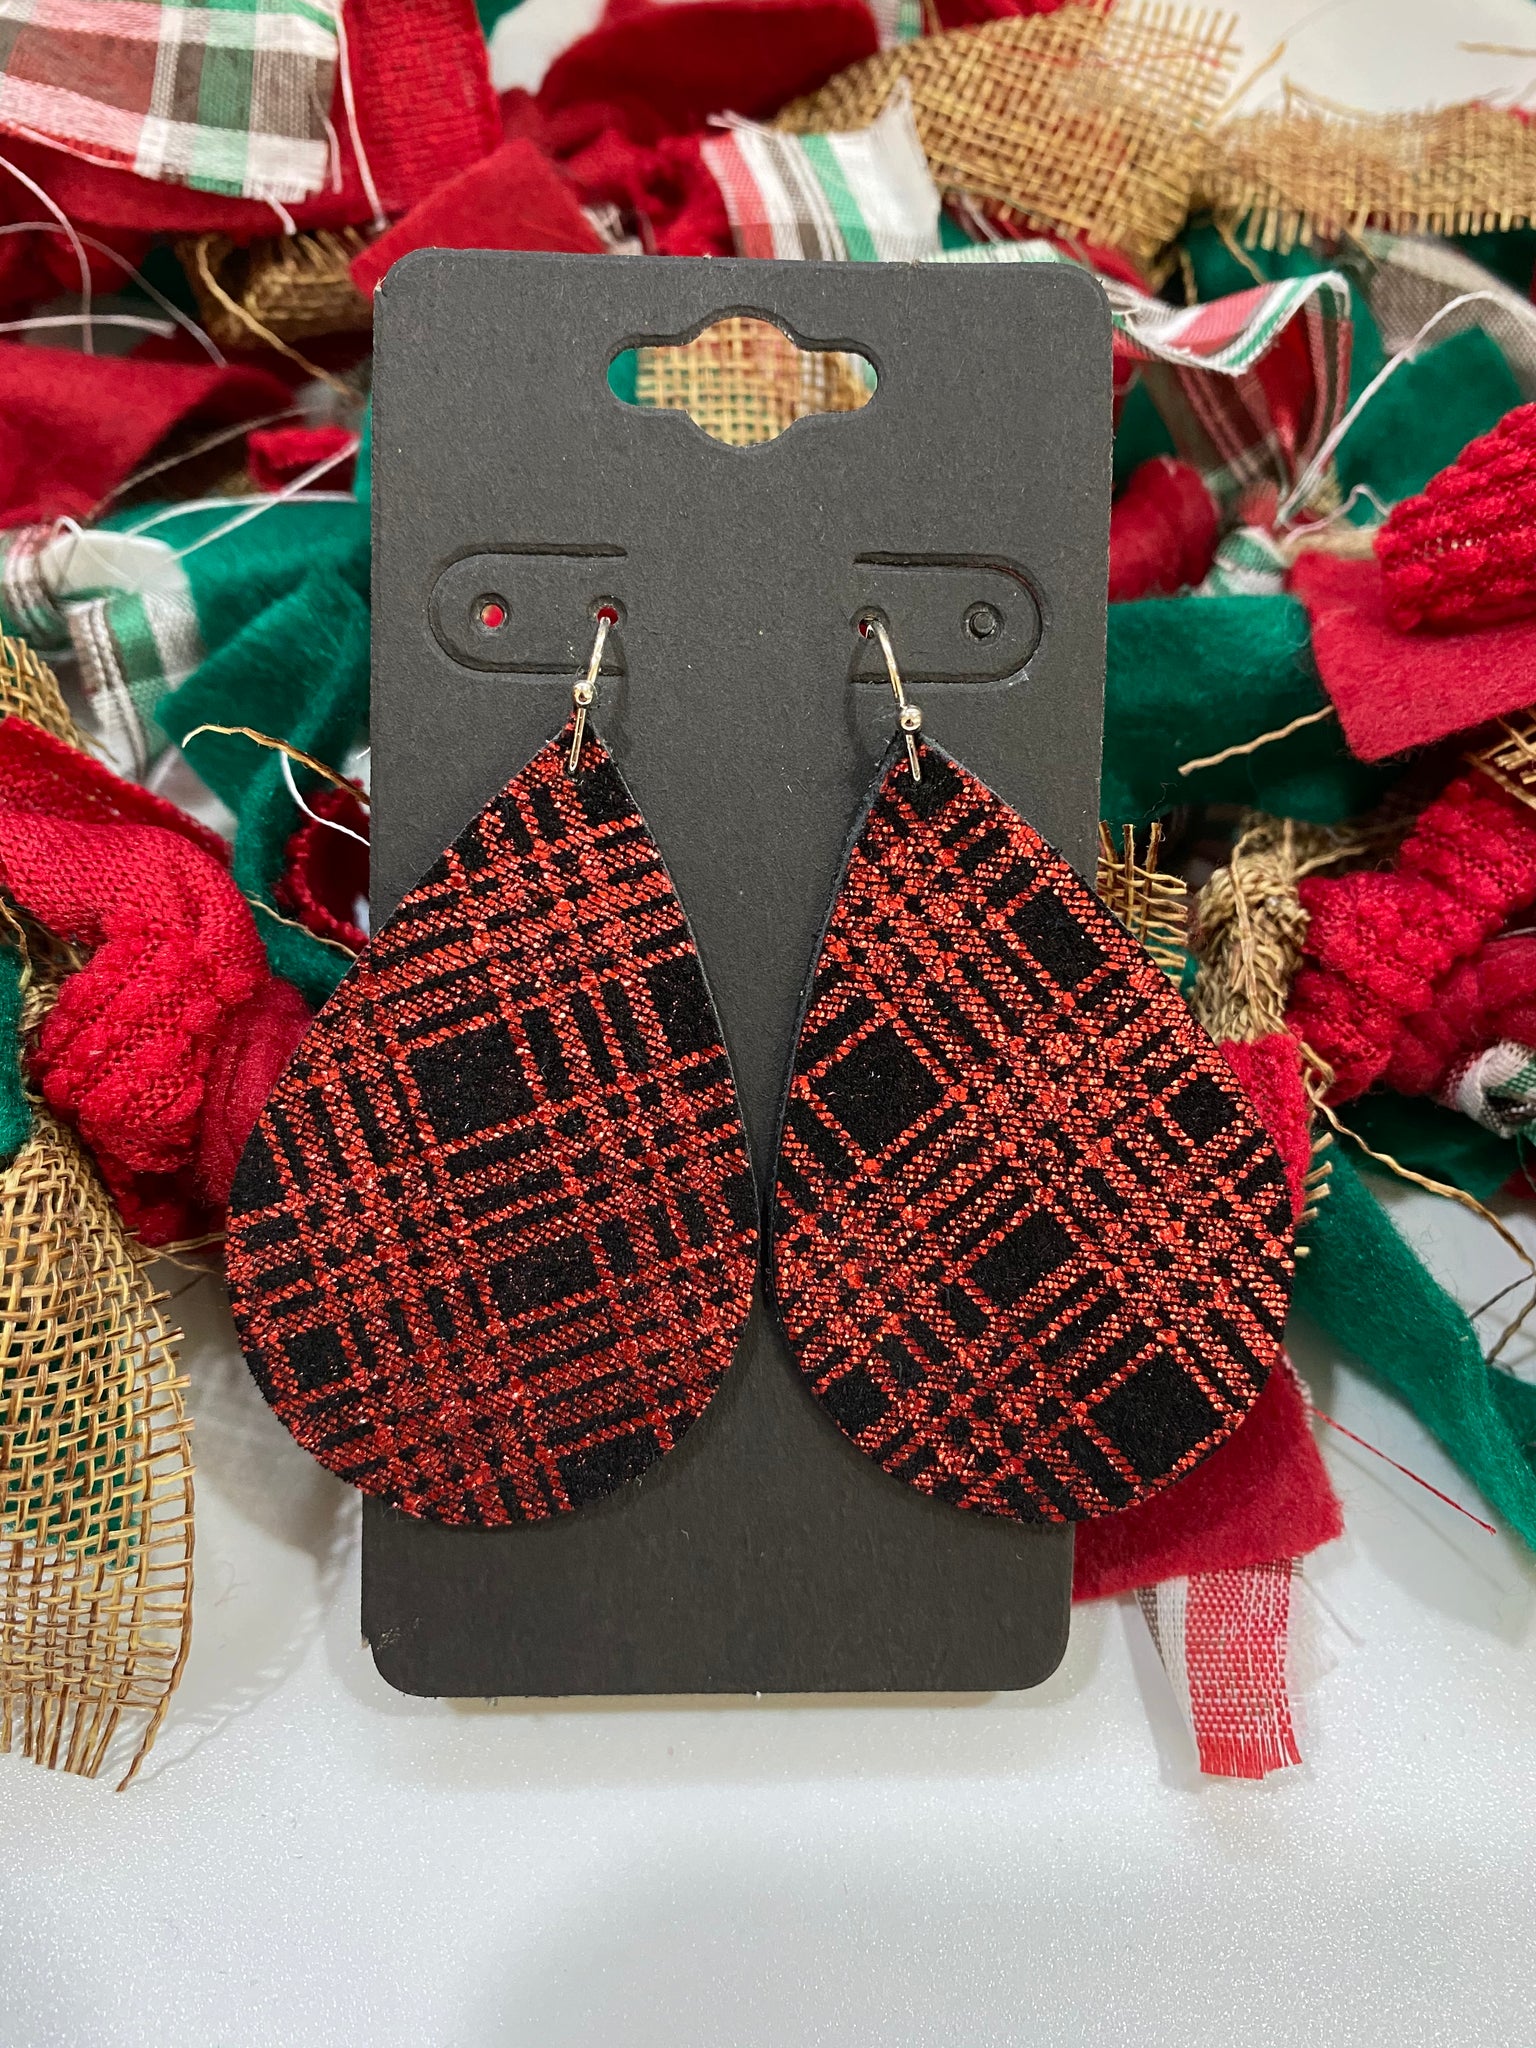 Black Suede Leather with Metallic Red Plaid Print Leather Earrings